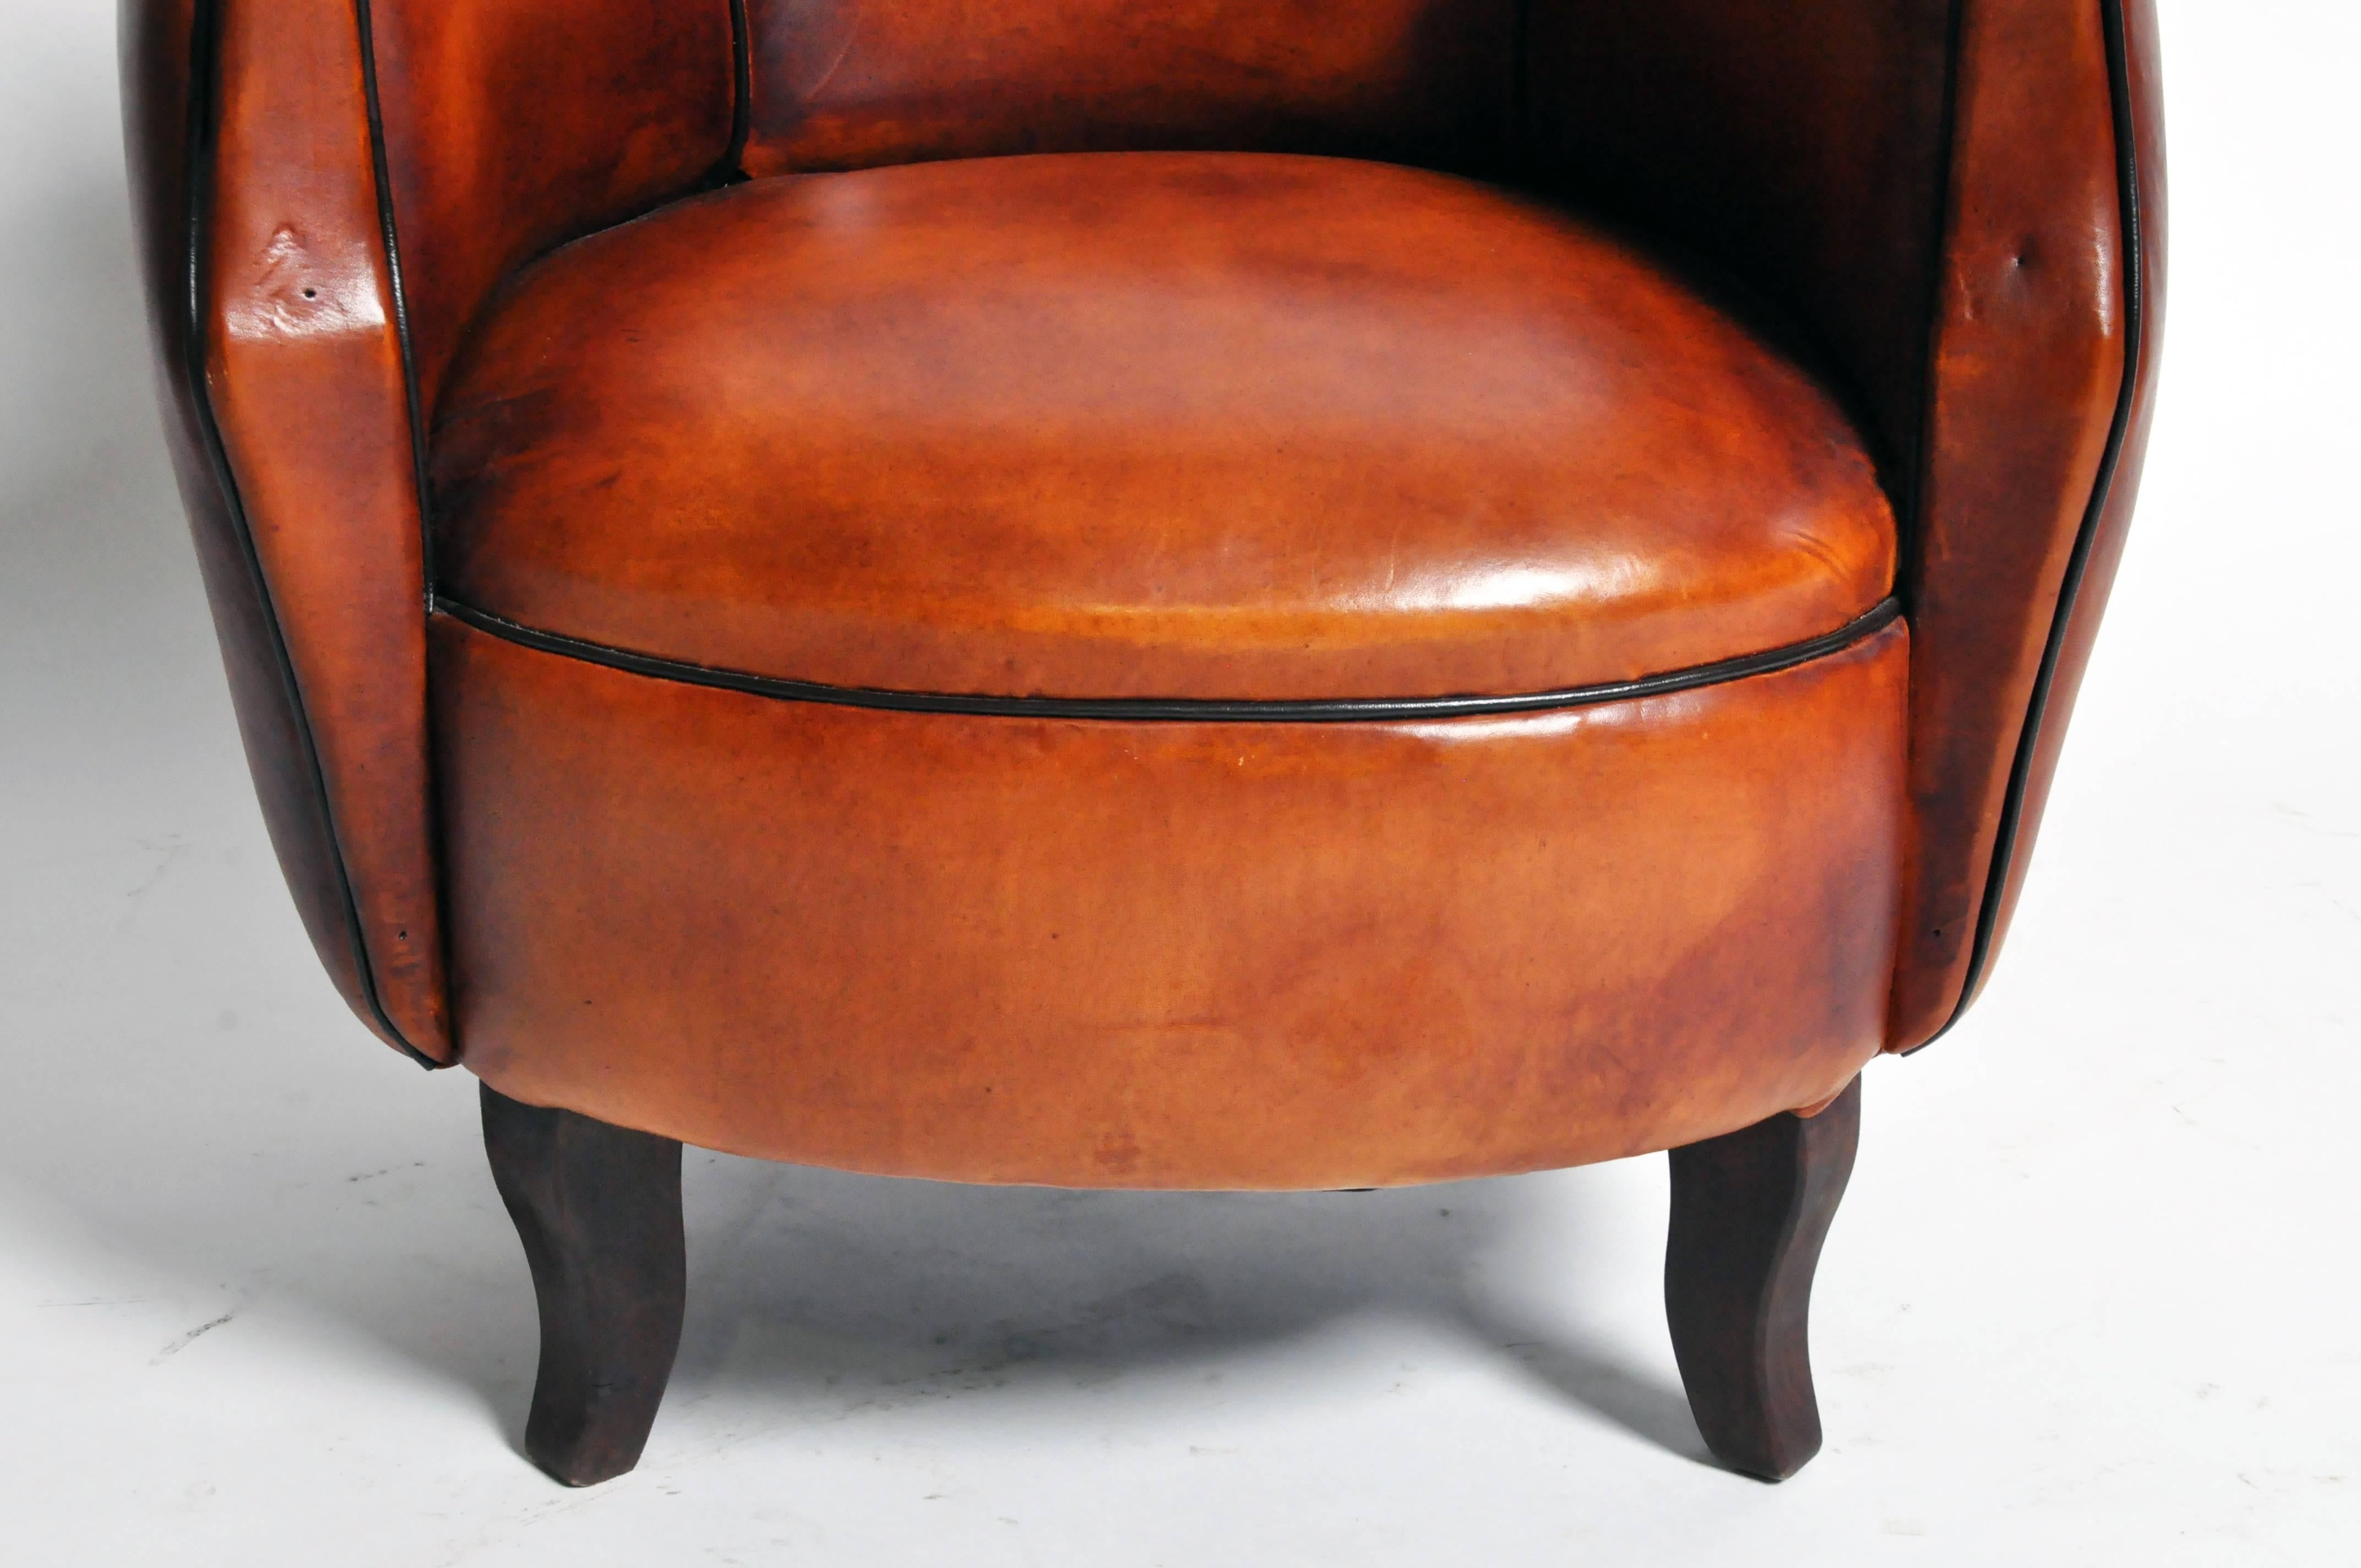 Contemporary Parisian Tulip Leather Club Chair with Dark Piping